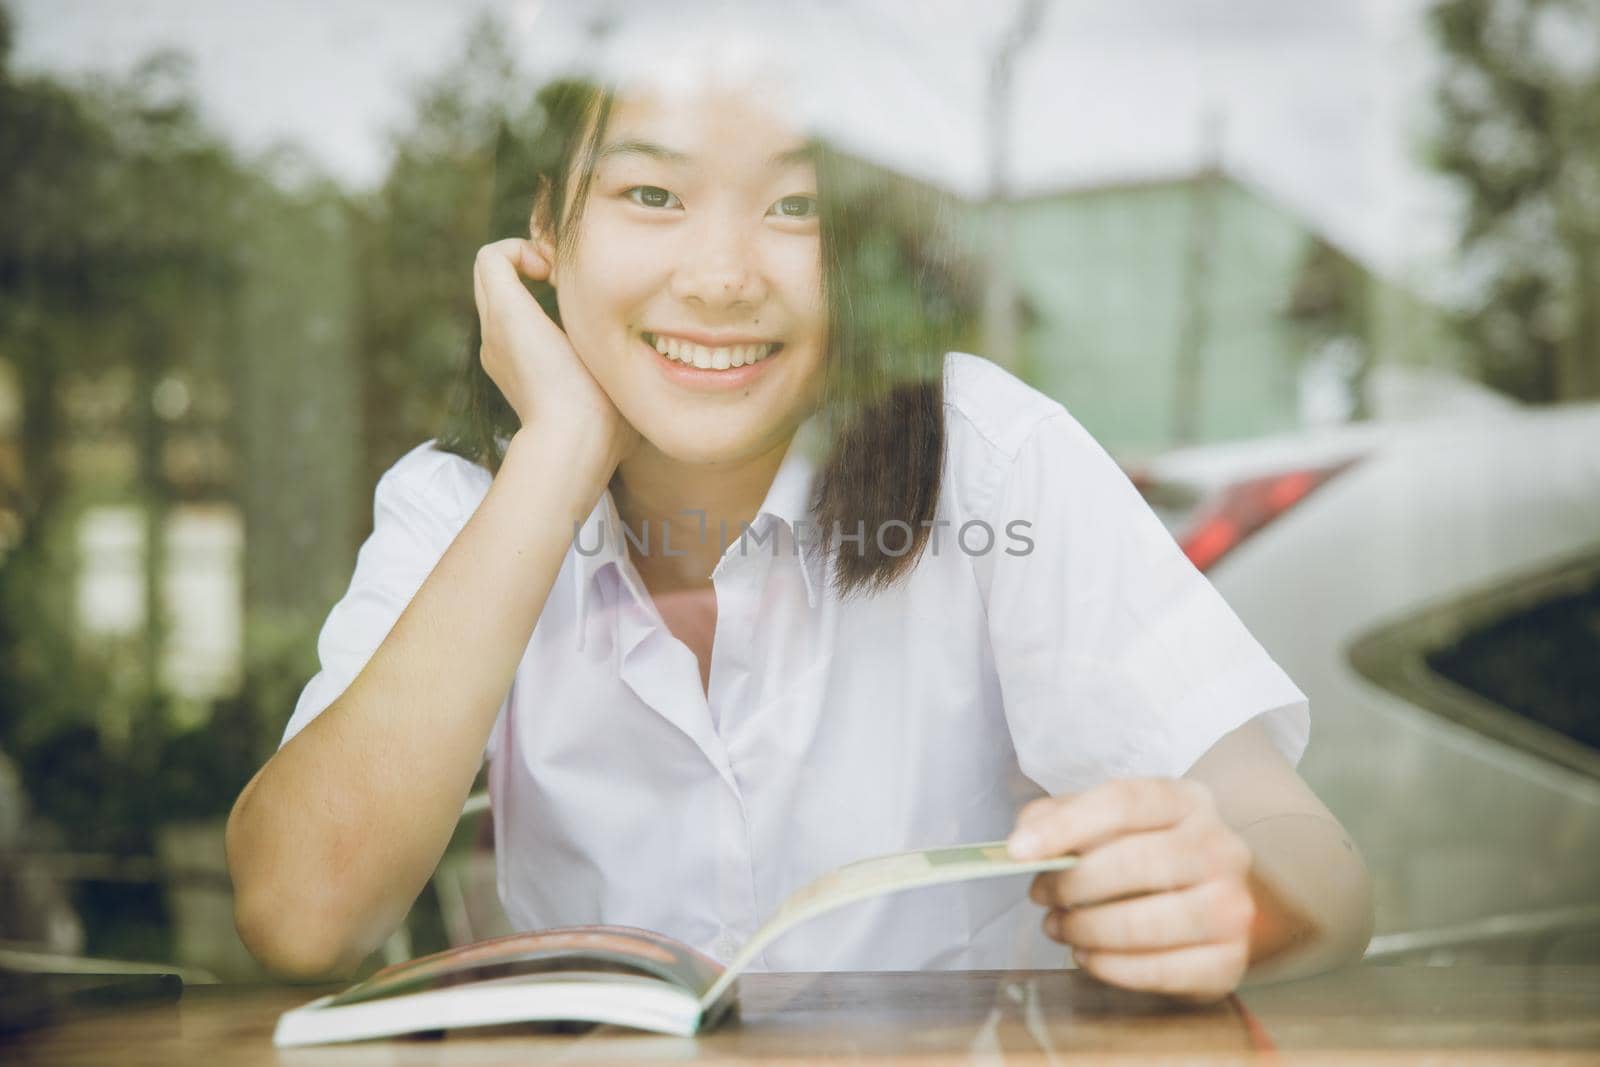 Asian university girl teen cute smiling looking through glass window shadow reflect effect while sitting reading book